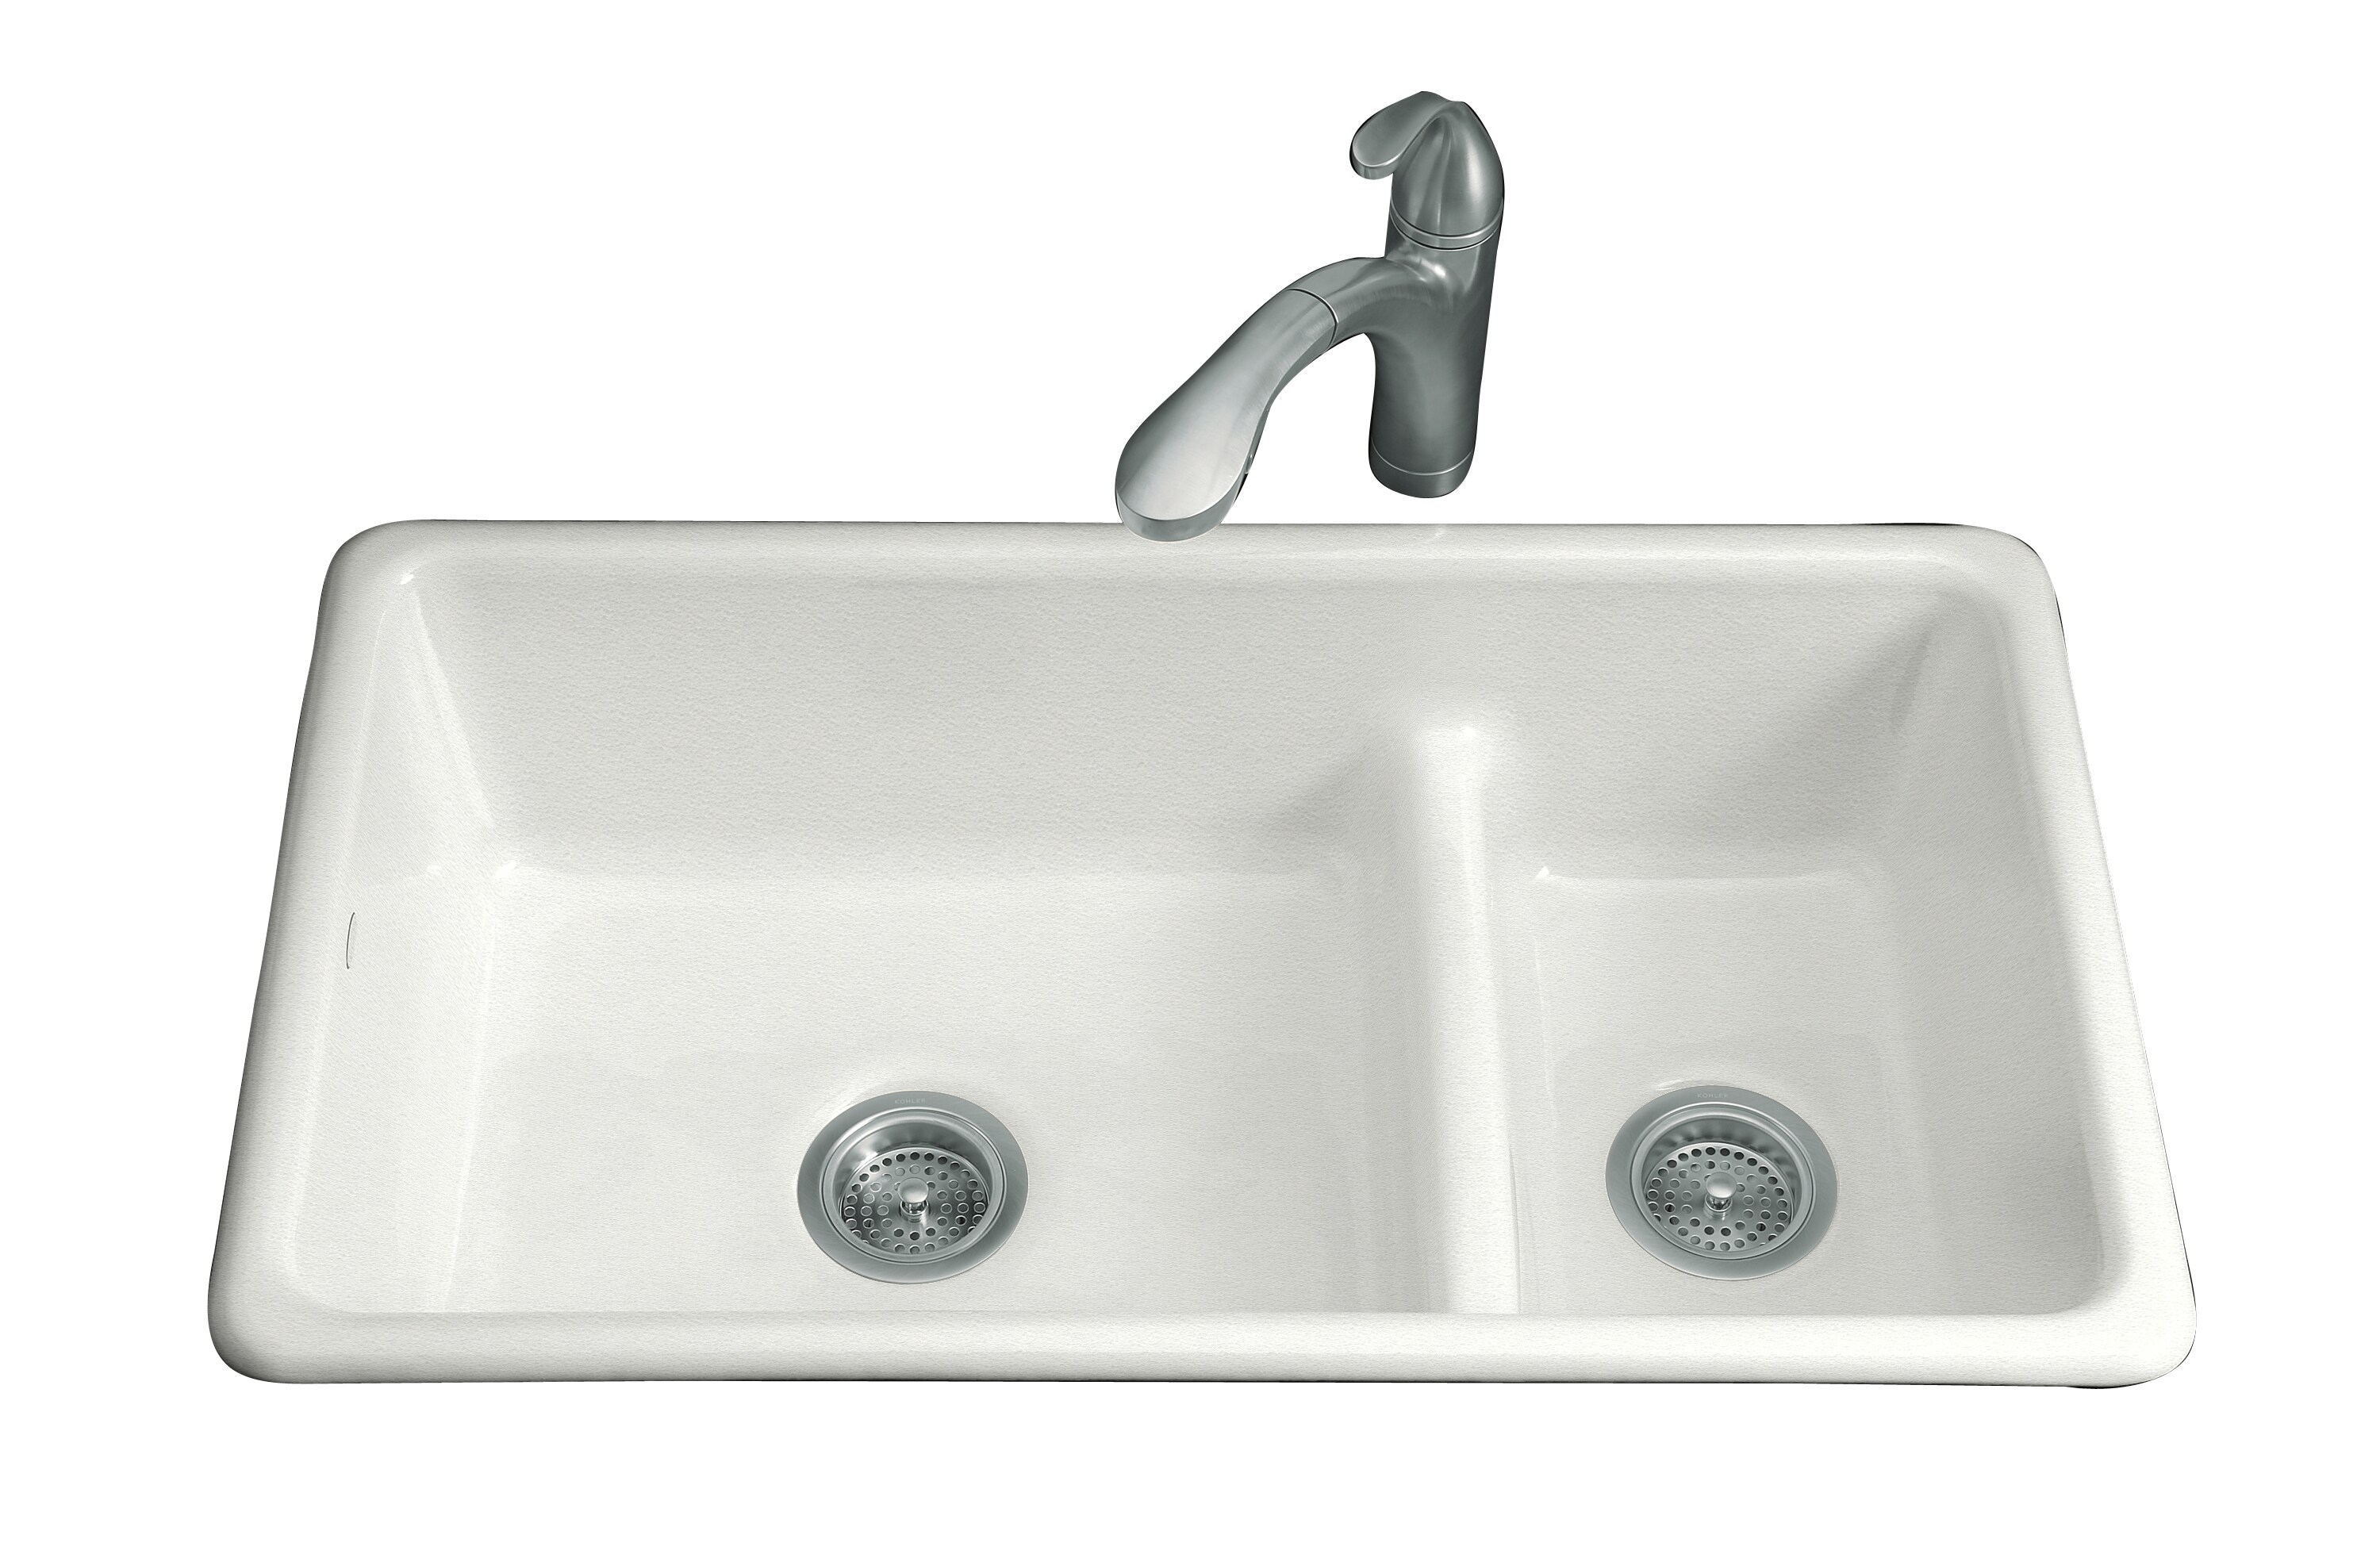 value of double white cast iron kitchen sink